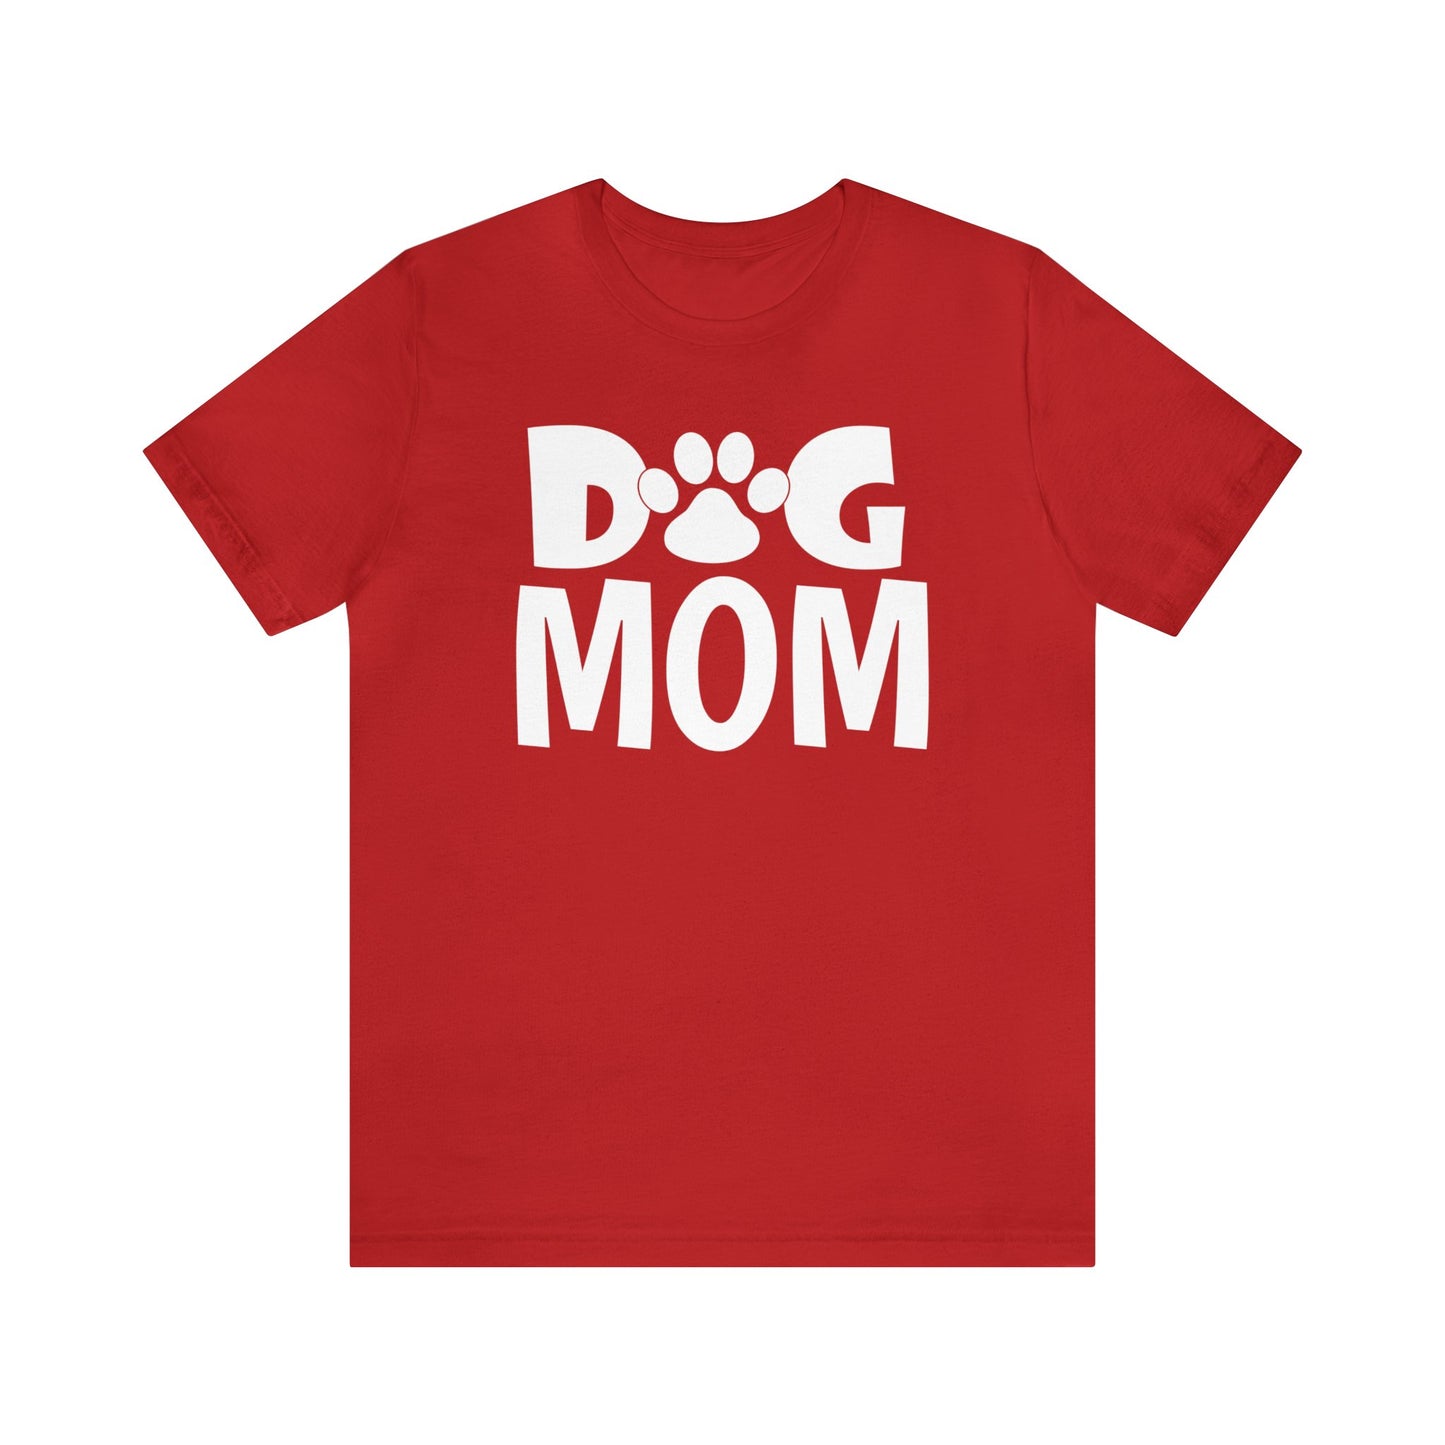 Dog Mom T-Shirt For Animal Lover T Shirt For Canine Rescue TShirt